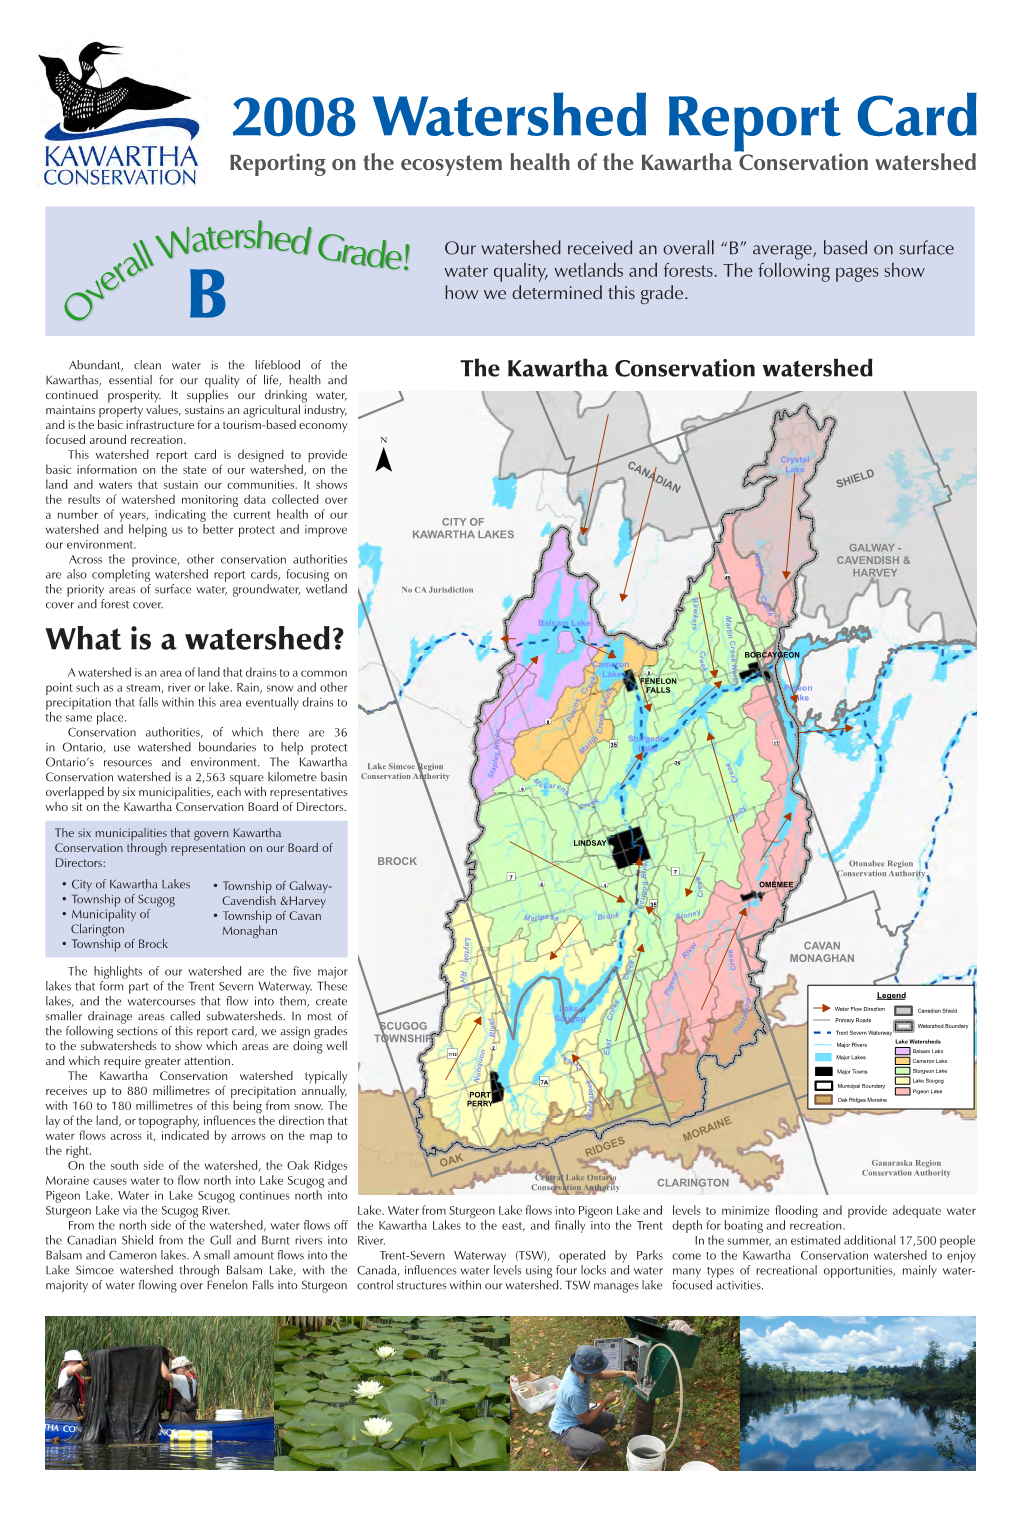 2008 Watershed Report Card Reporting on the Ecosystem Health of the Kawartha Conservation Watershed